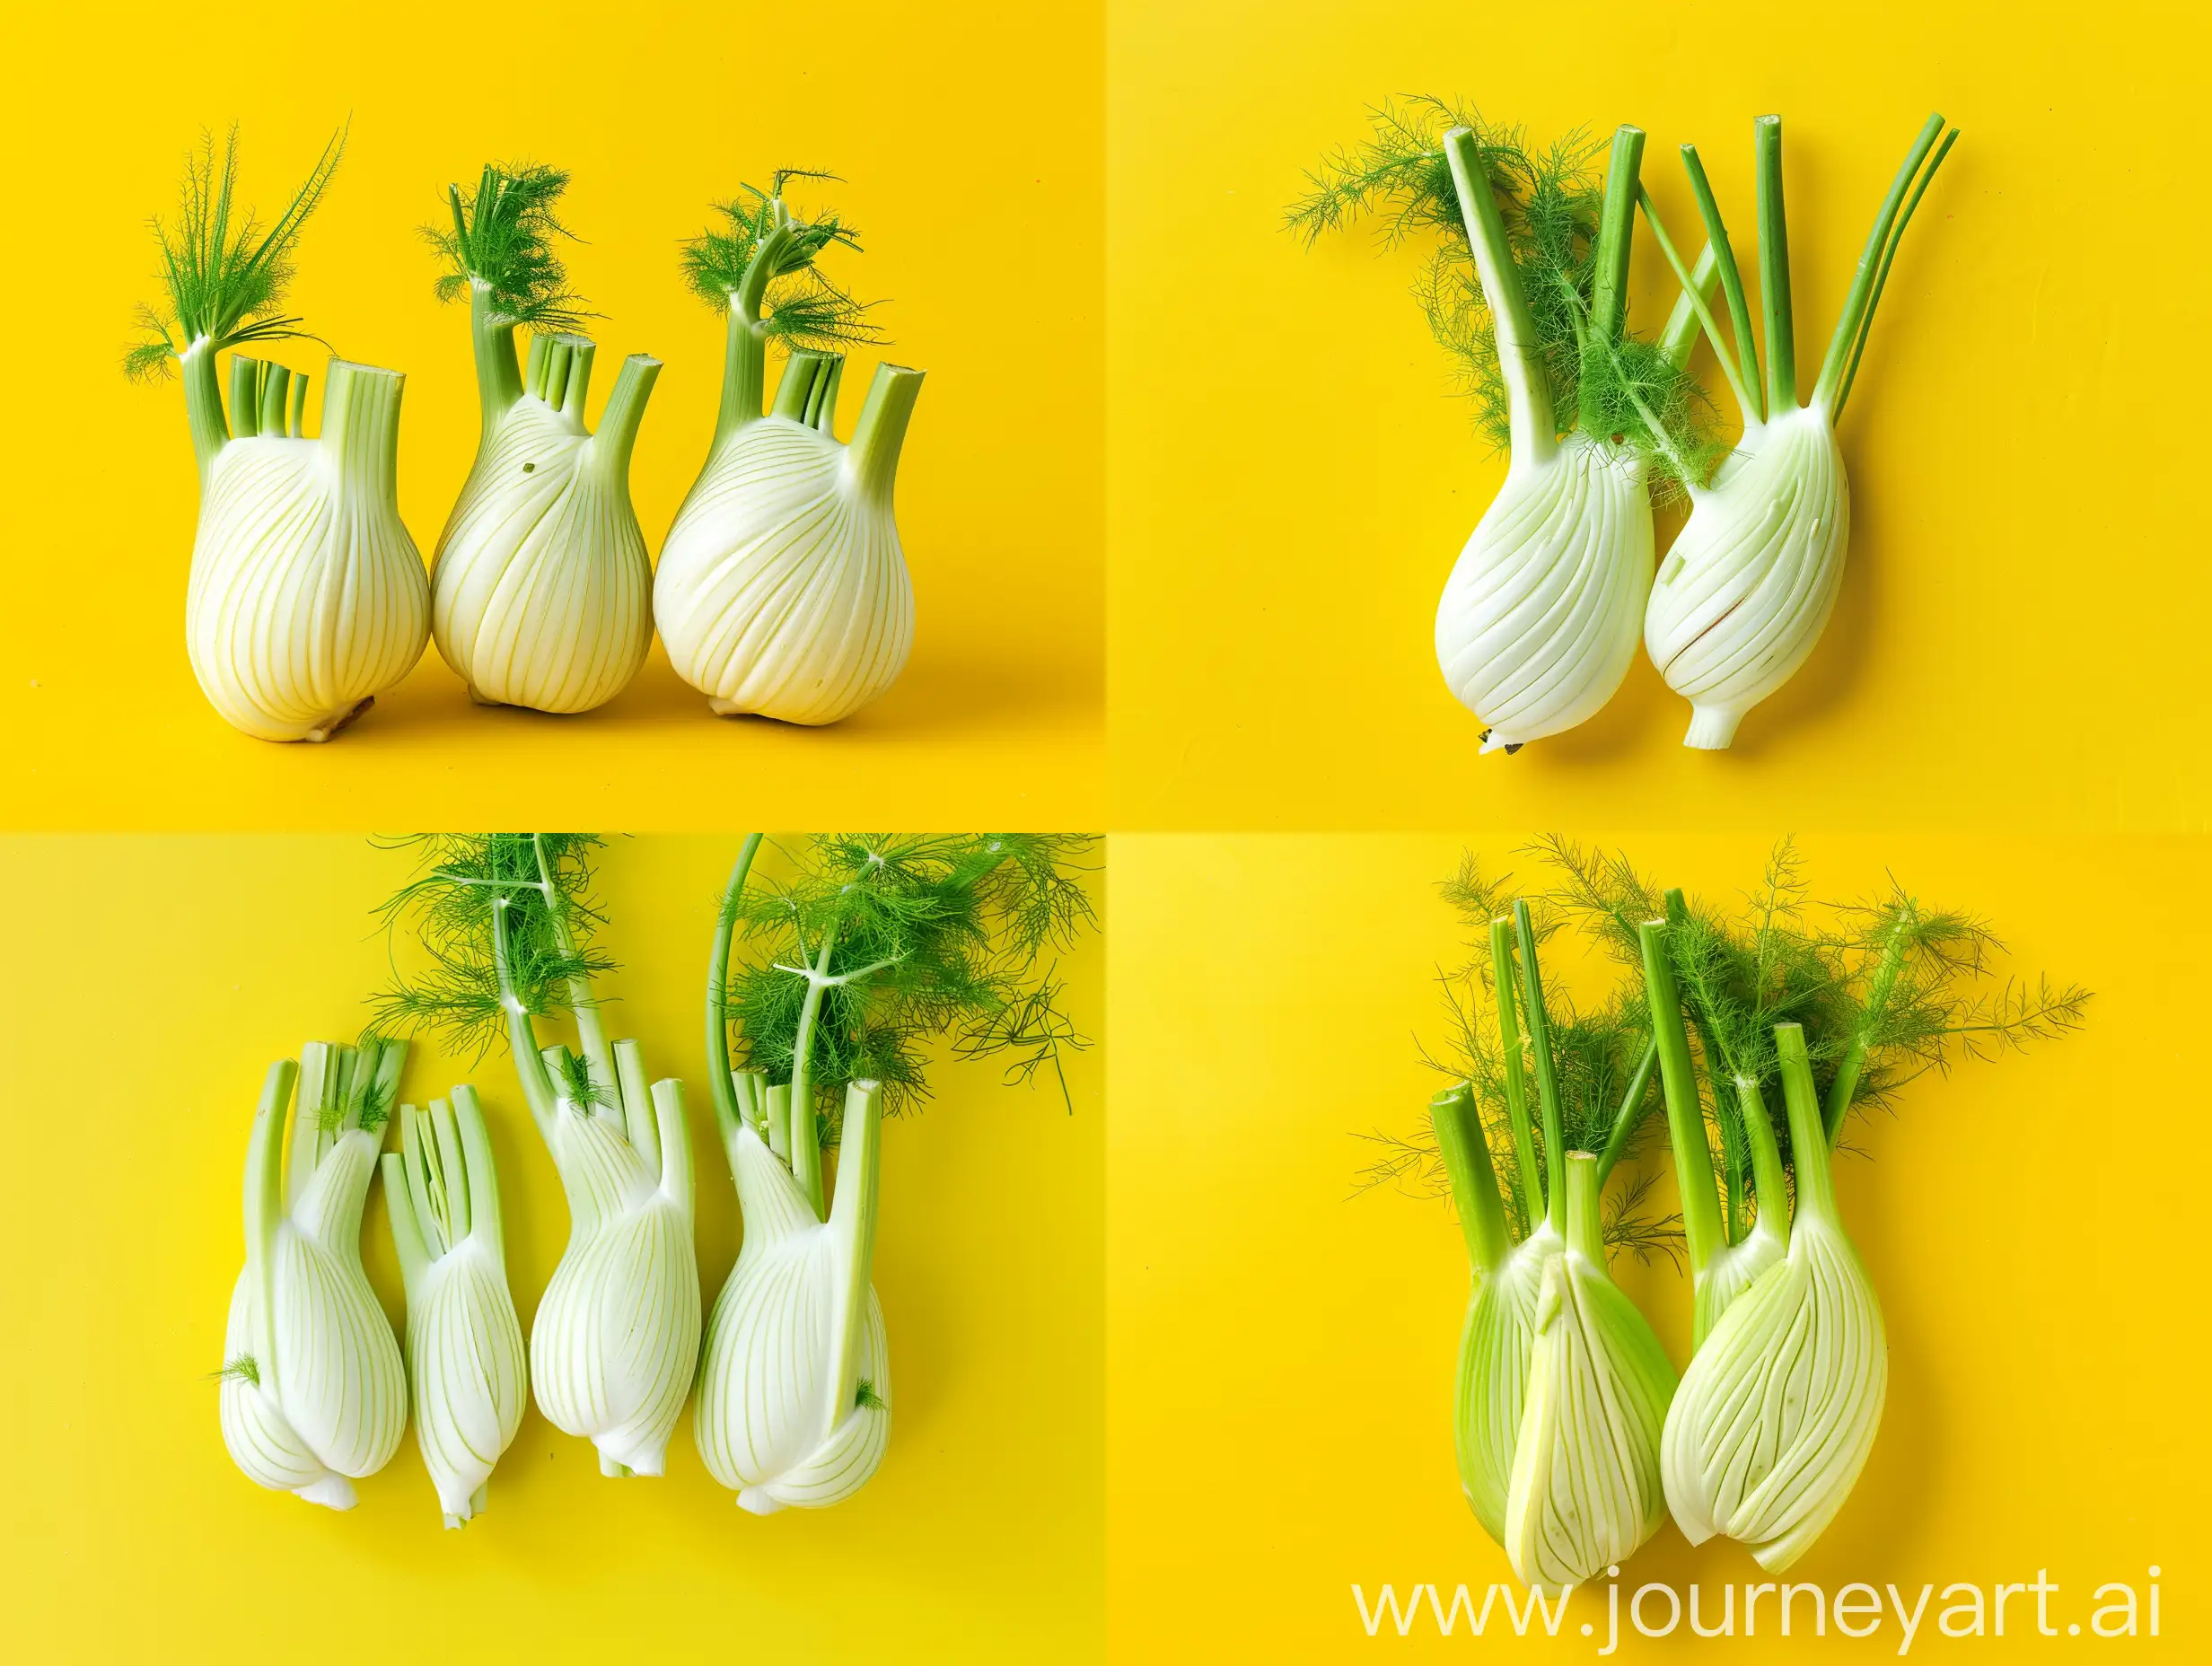 Vibrant-Studio-Photography-Fennel-on-Bright-Yellow-Background